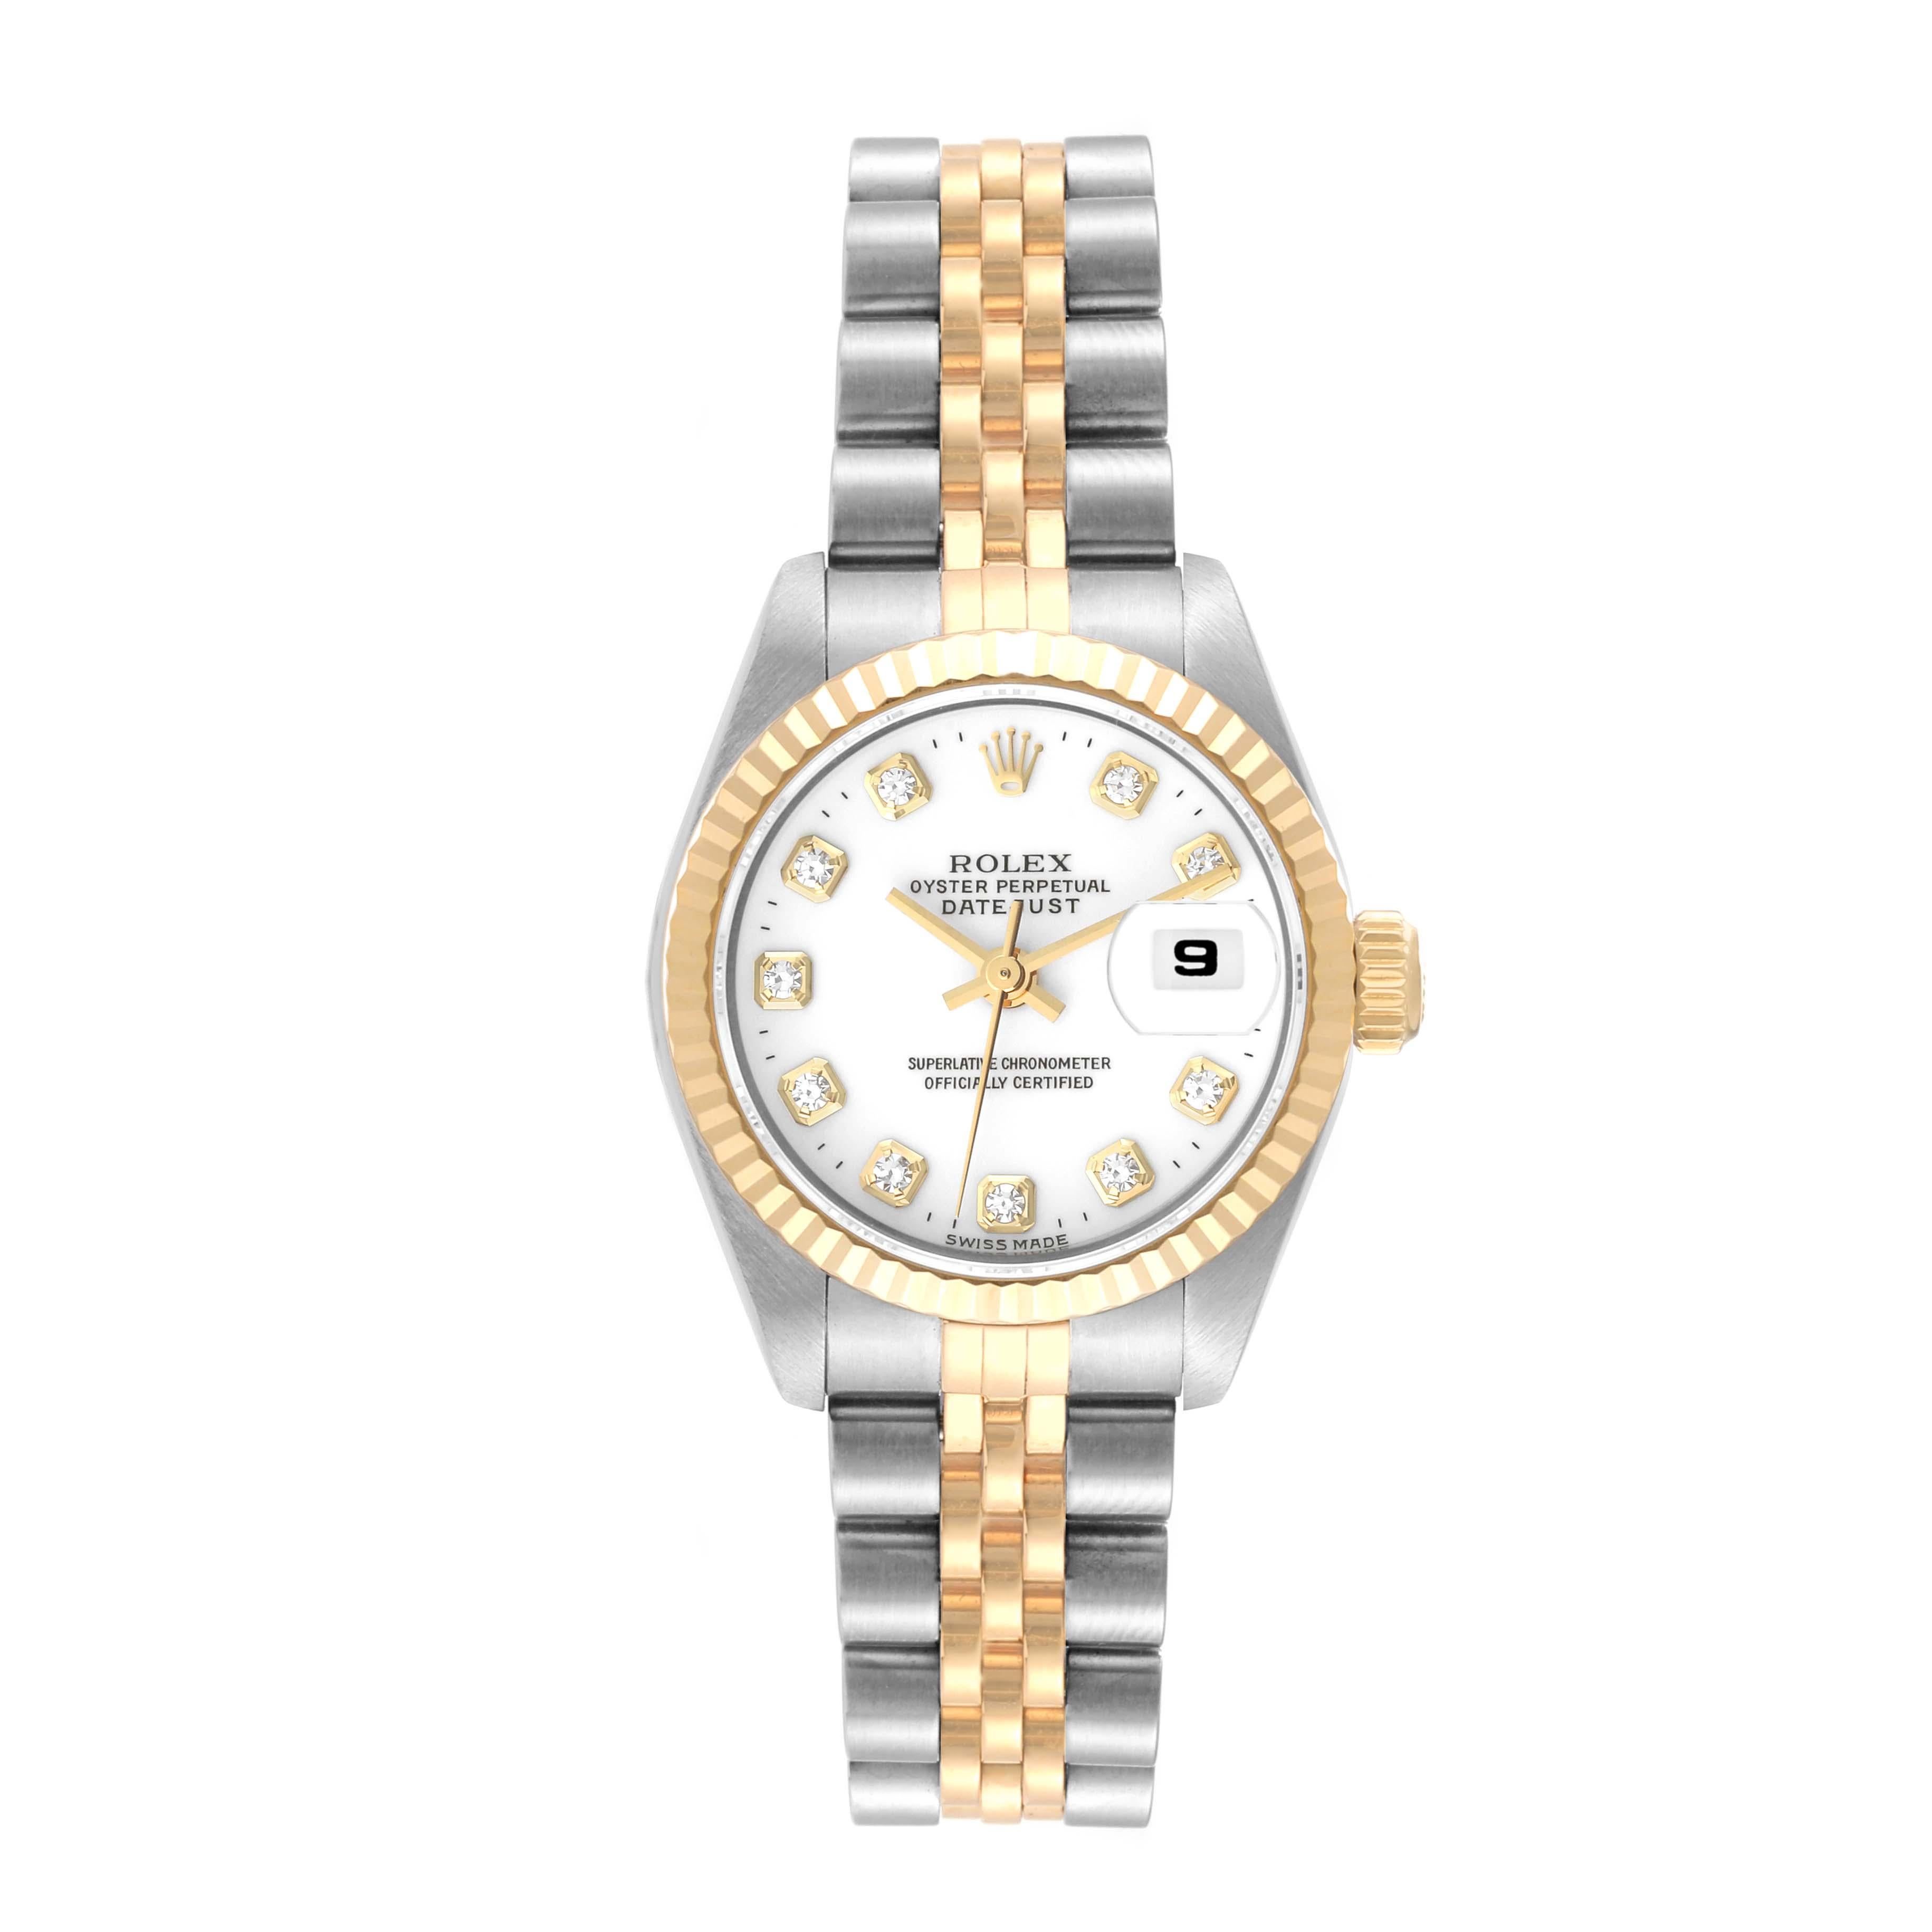 Rolex Datejust White Diamond Dial Steel Yellow Gold Ladies Watch 69173. Officially certified chronometer automatic self-winding movement. Stainless steel oyster case 26.0 mm in diameter. Rolex logo on the crown. 18k yellow gold fluted bezel. Scratch